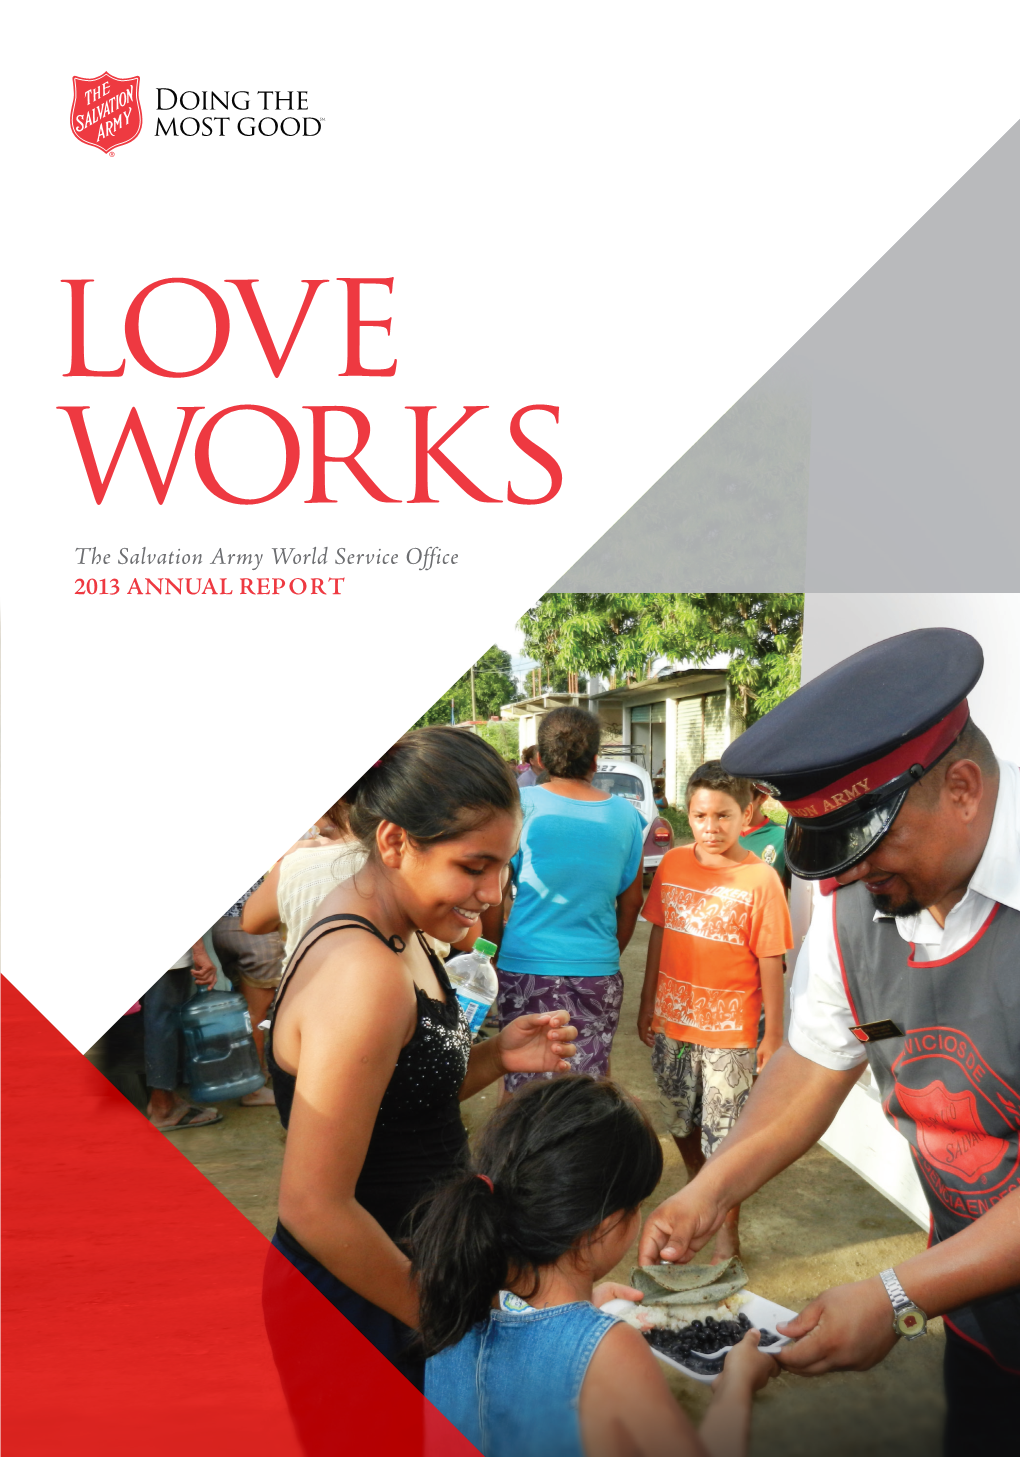 The Salvation Army World Service Office 2013 ANNUAL REPORT “We Must Be As Open As Children to Do This Work, and As Vulnerable